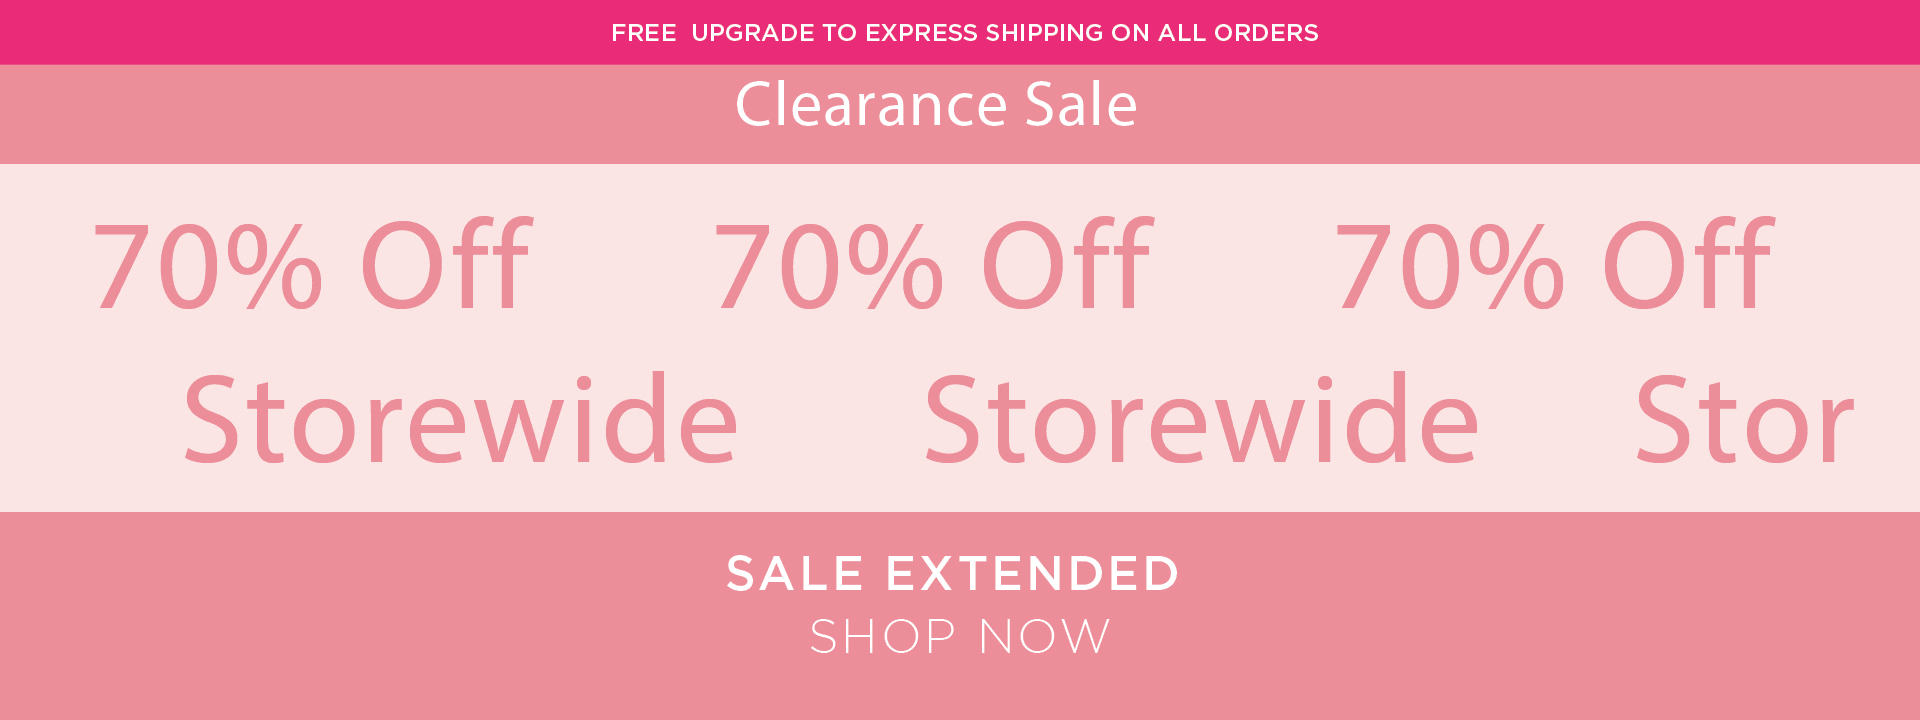 Alannah Hill clearance sale 70% OFF storewide